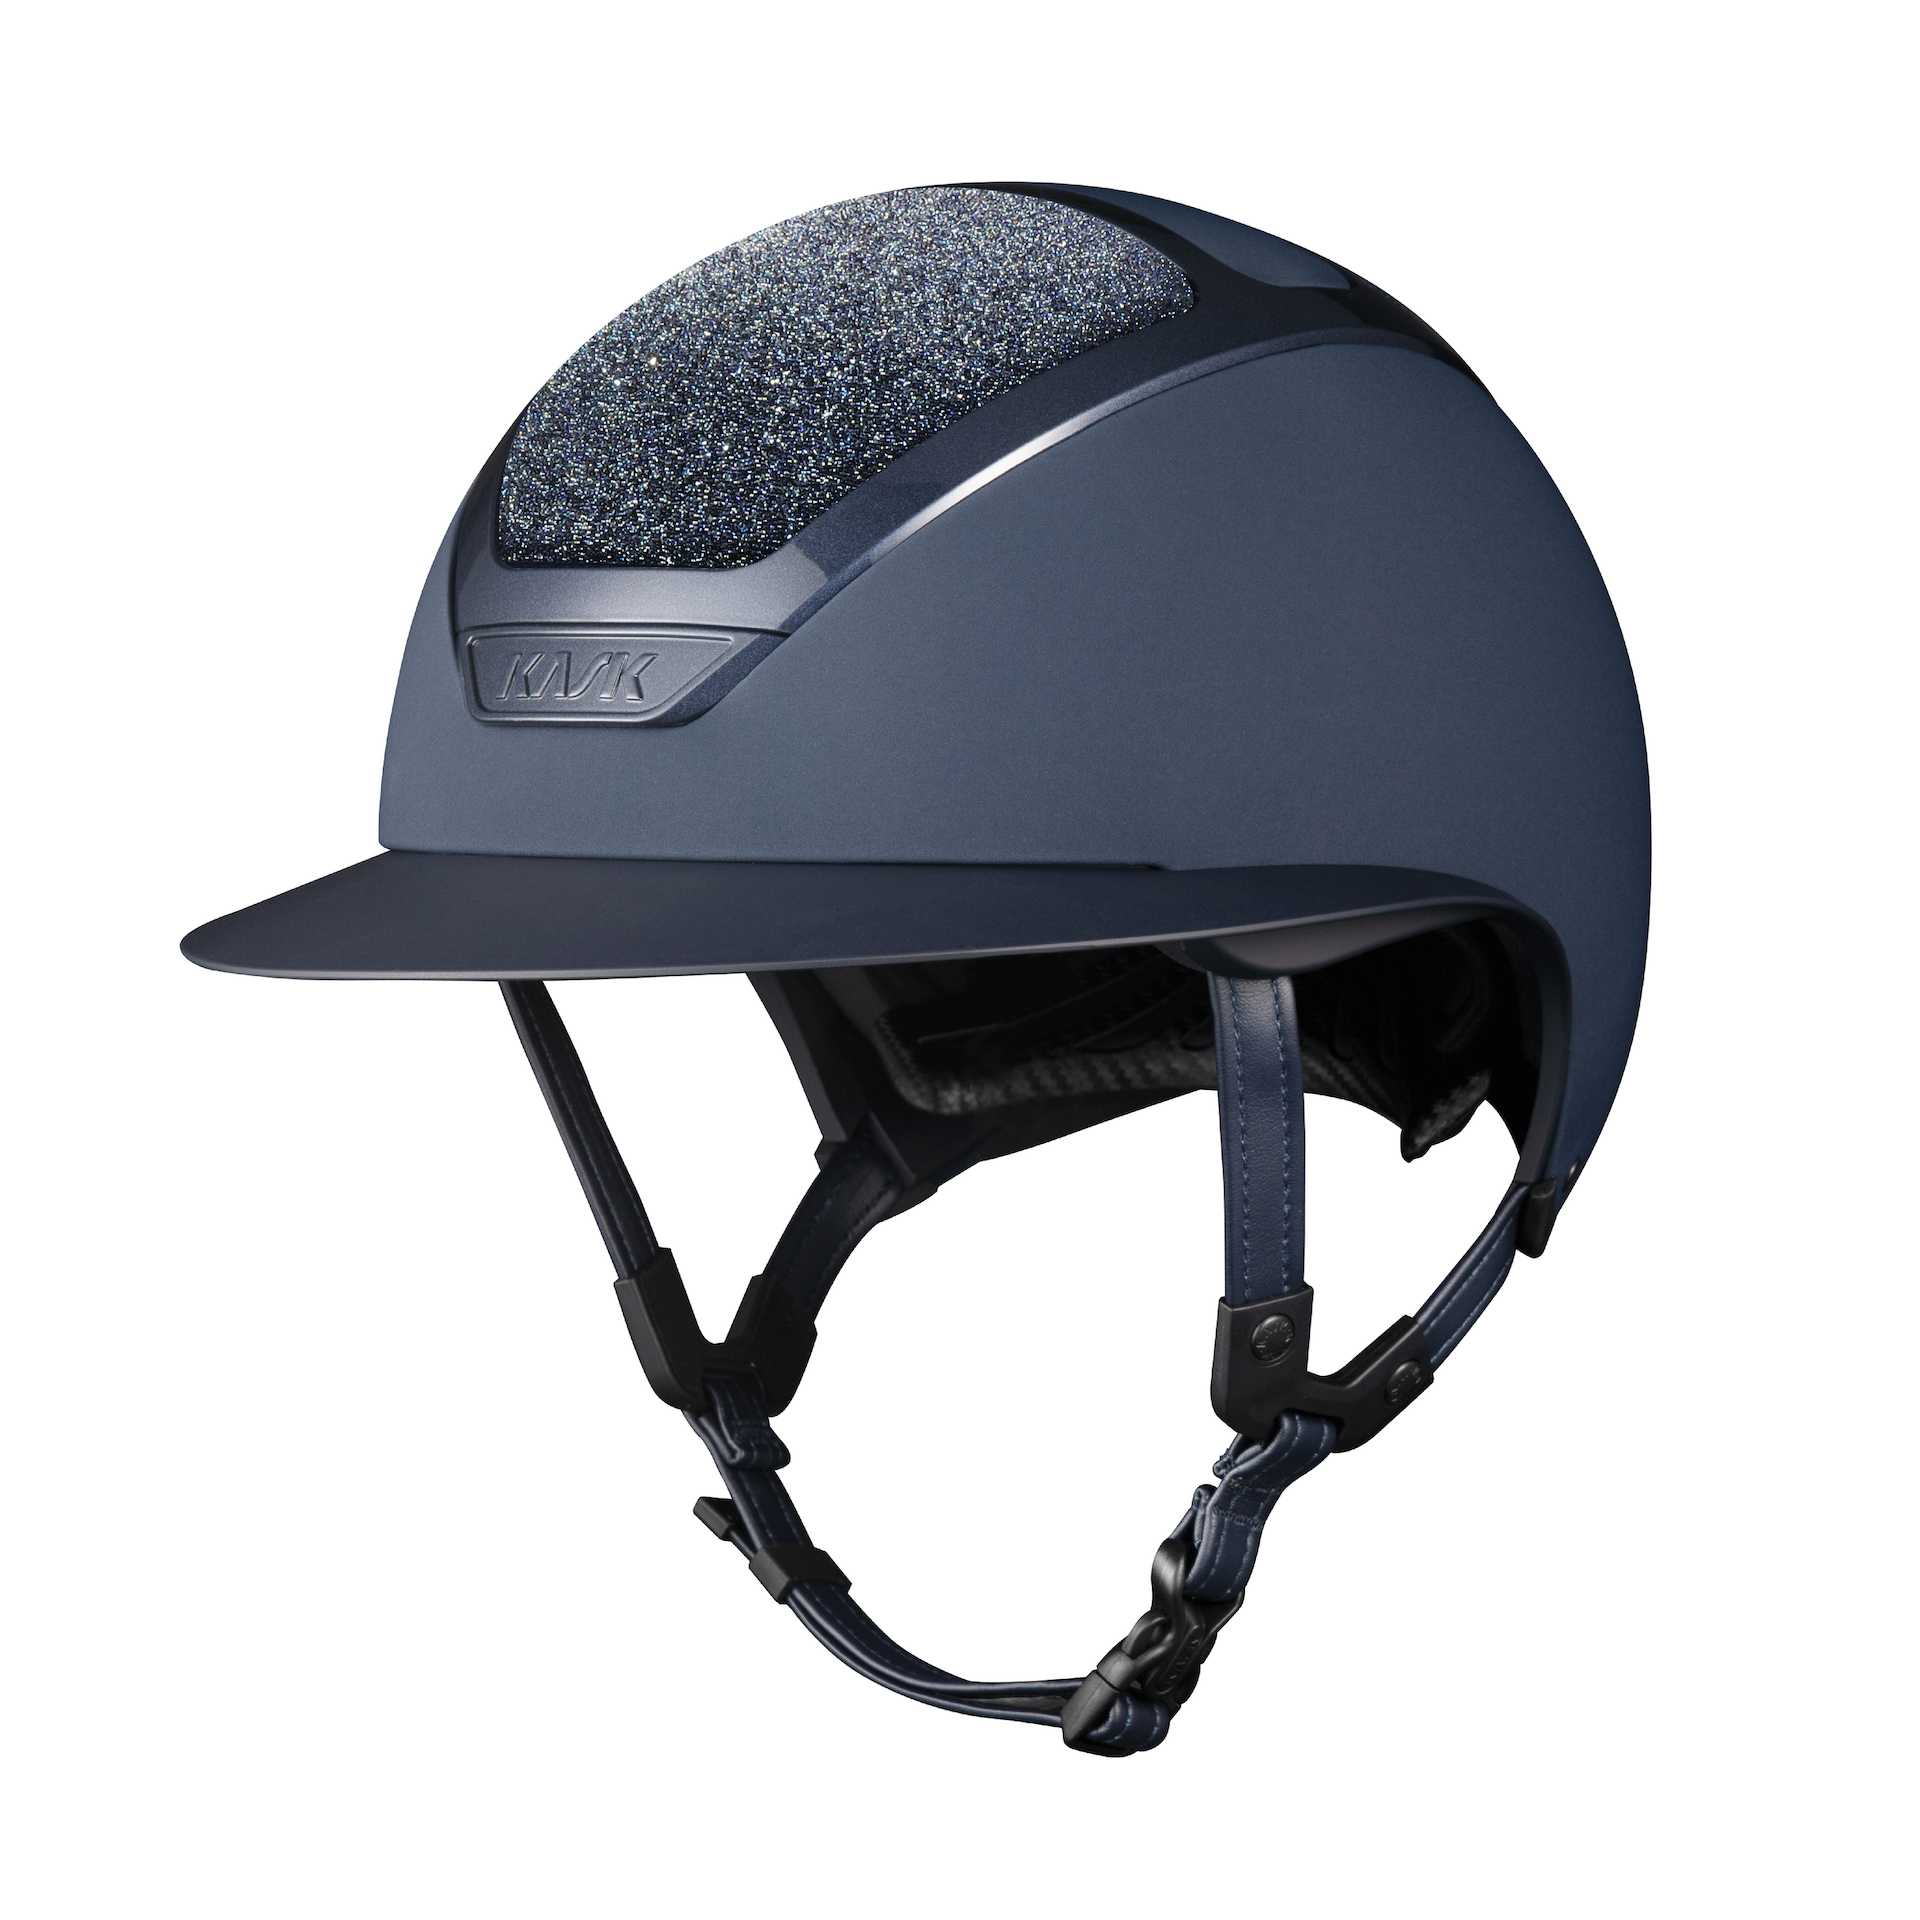 KASK STAR LADY PURE SHINE STARRY NIGHT LIMITIERTER REITHELM